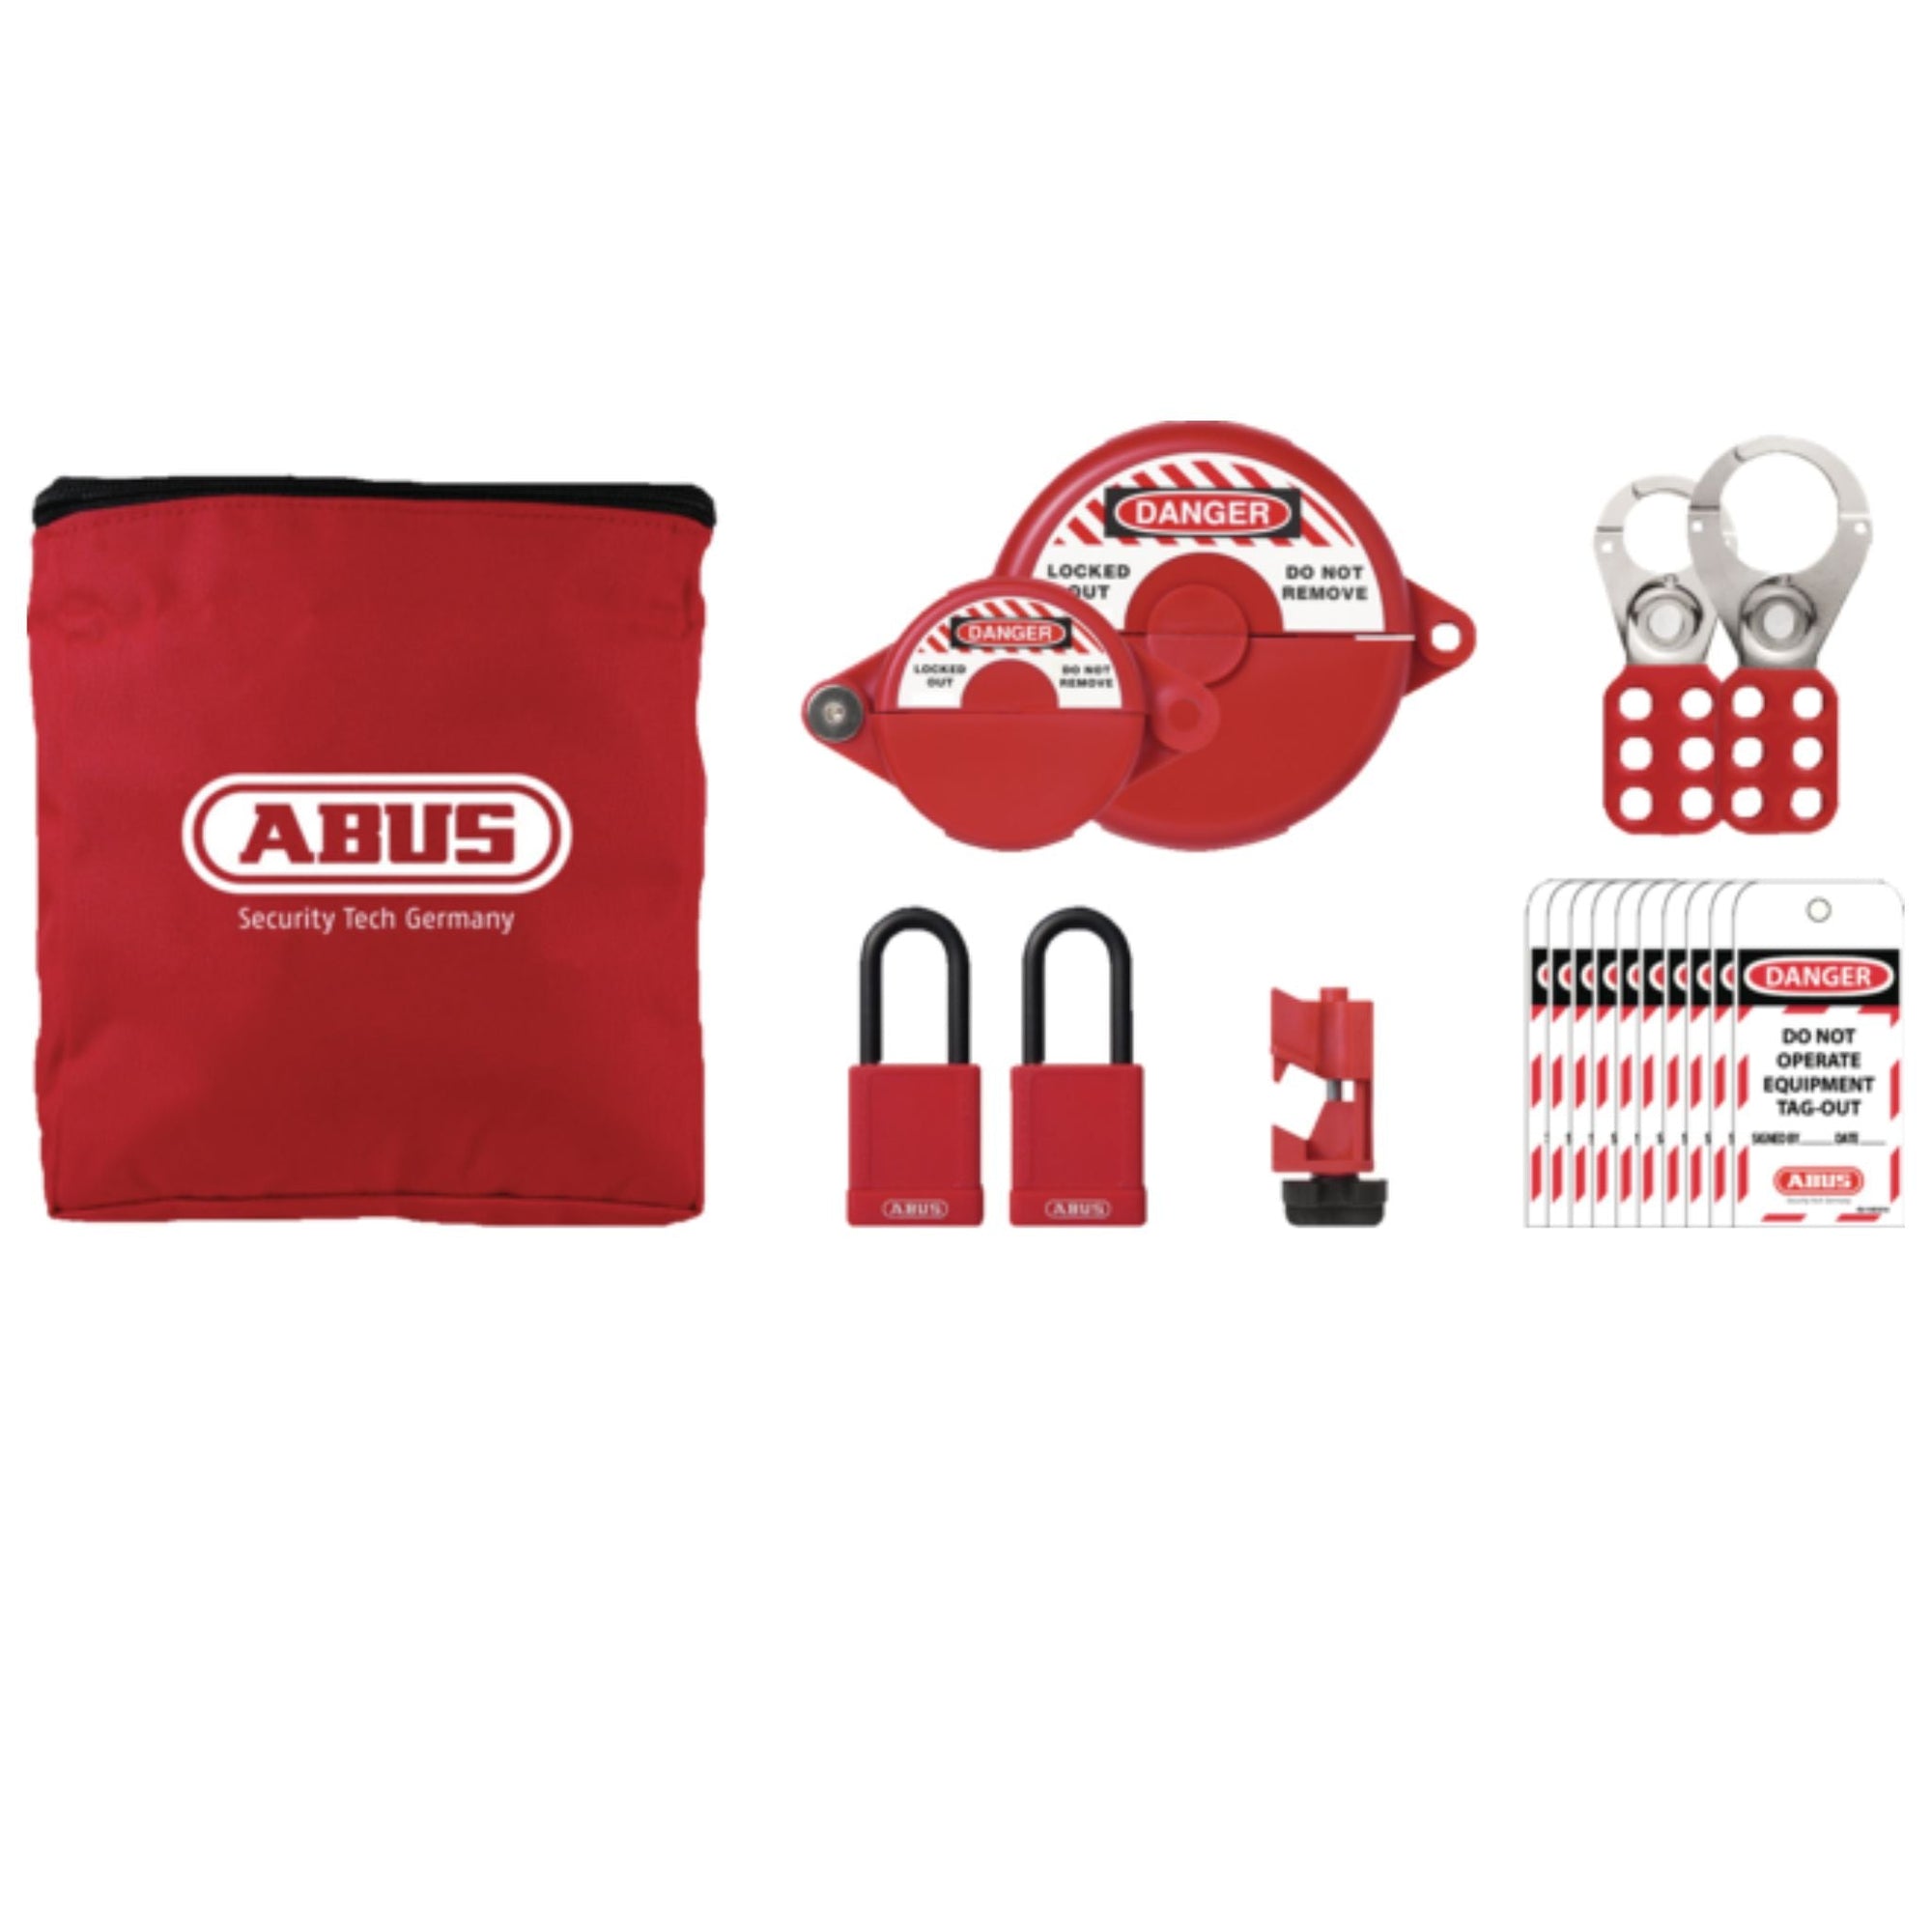 Abus K900 (97173) Basic Pouch Kit Stores and Organizes Lockout Devices In One Location with Small Pouch - The Lock Source